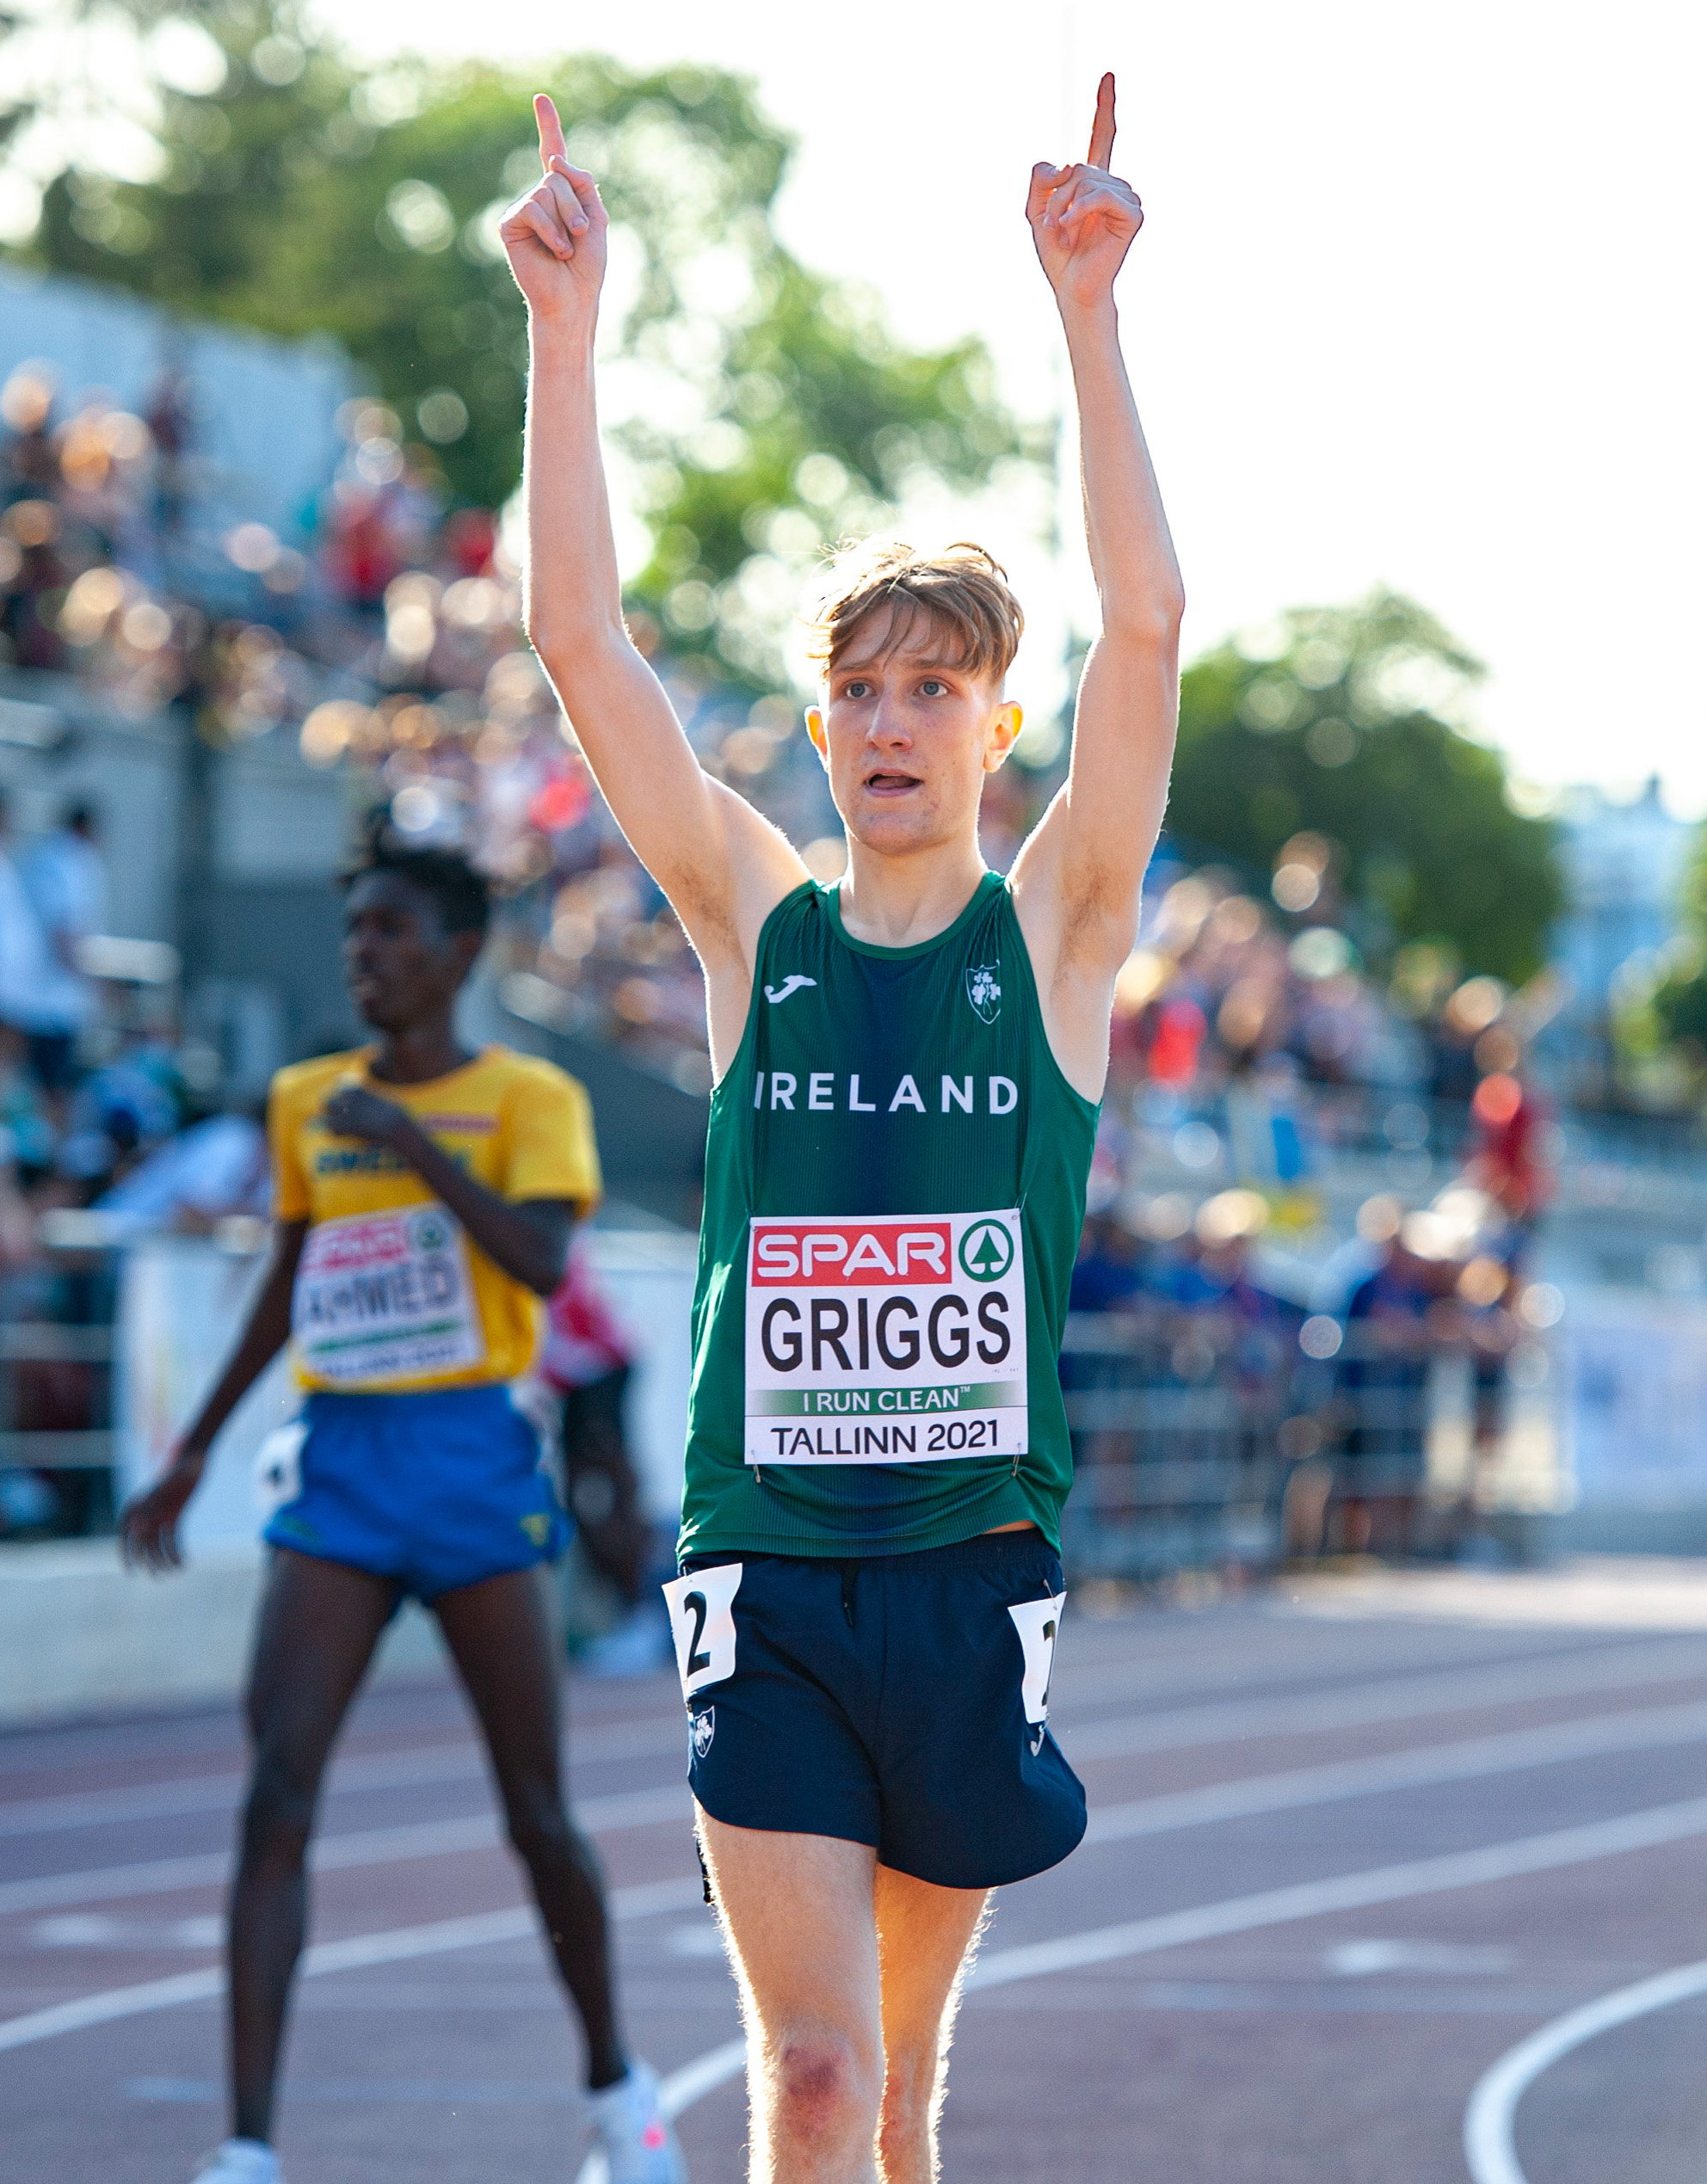 GRIGGS & TUTHILL READY FOR WORLD U20 FINALS